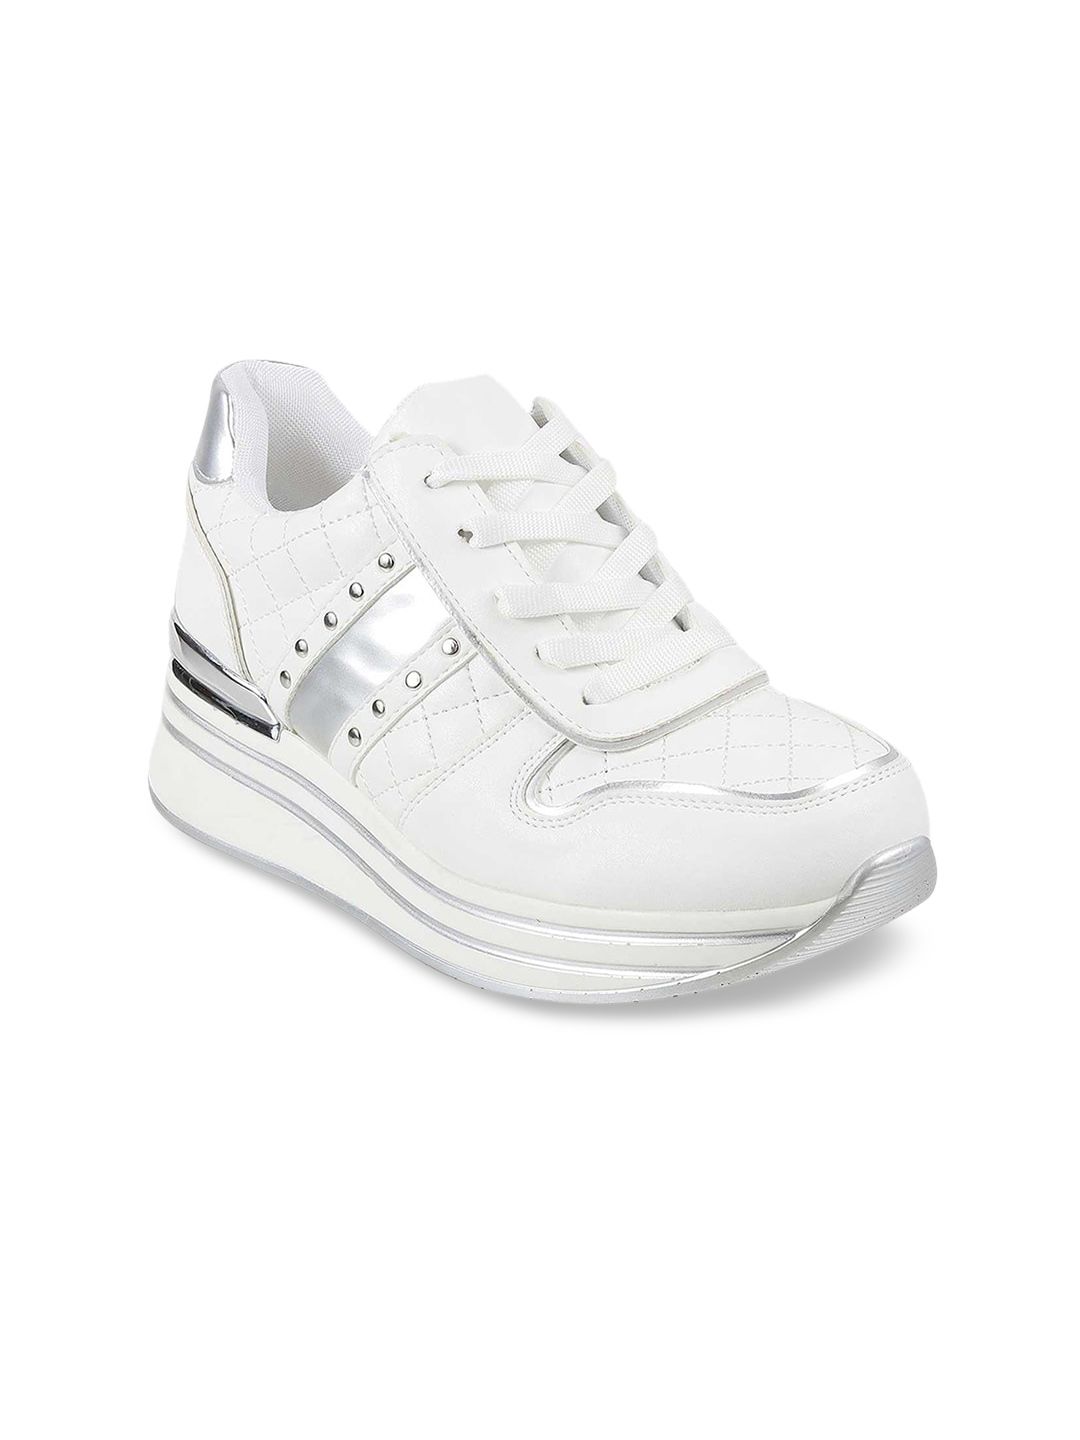 Mochi Women White Textured Sneakers Price in India